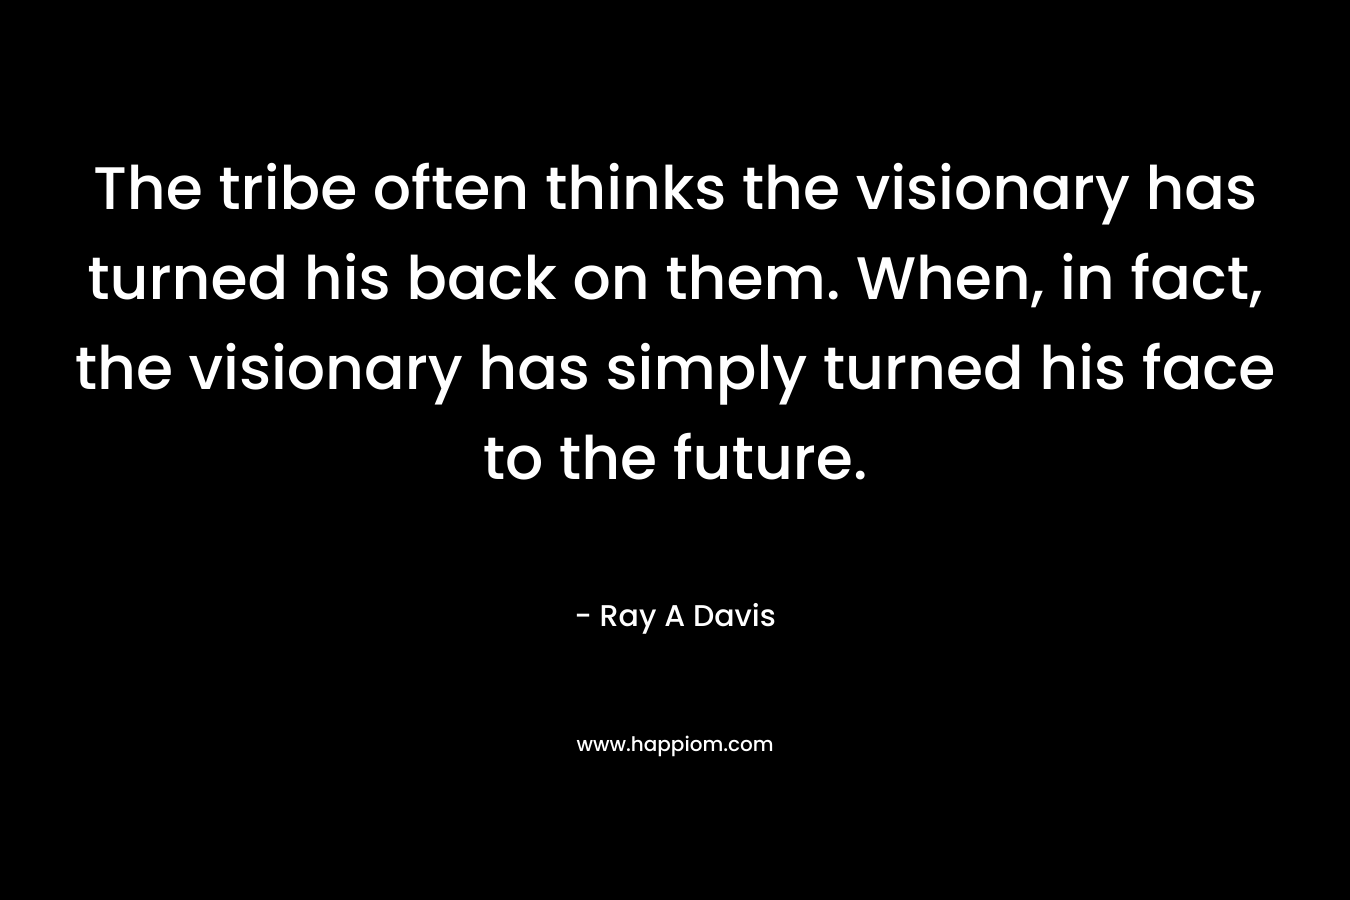 The tribe often thinks the visionary has turned his back on them. When, in fact, the visionary has simply turned his face to the future.